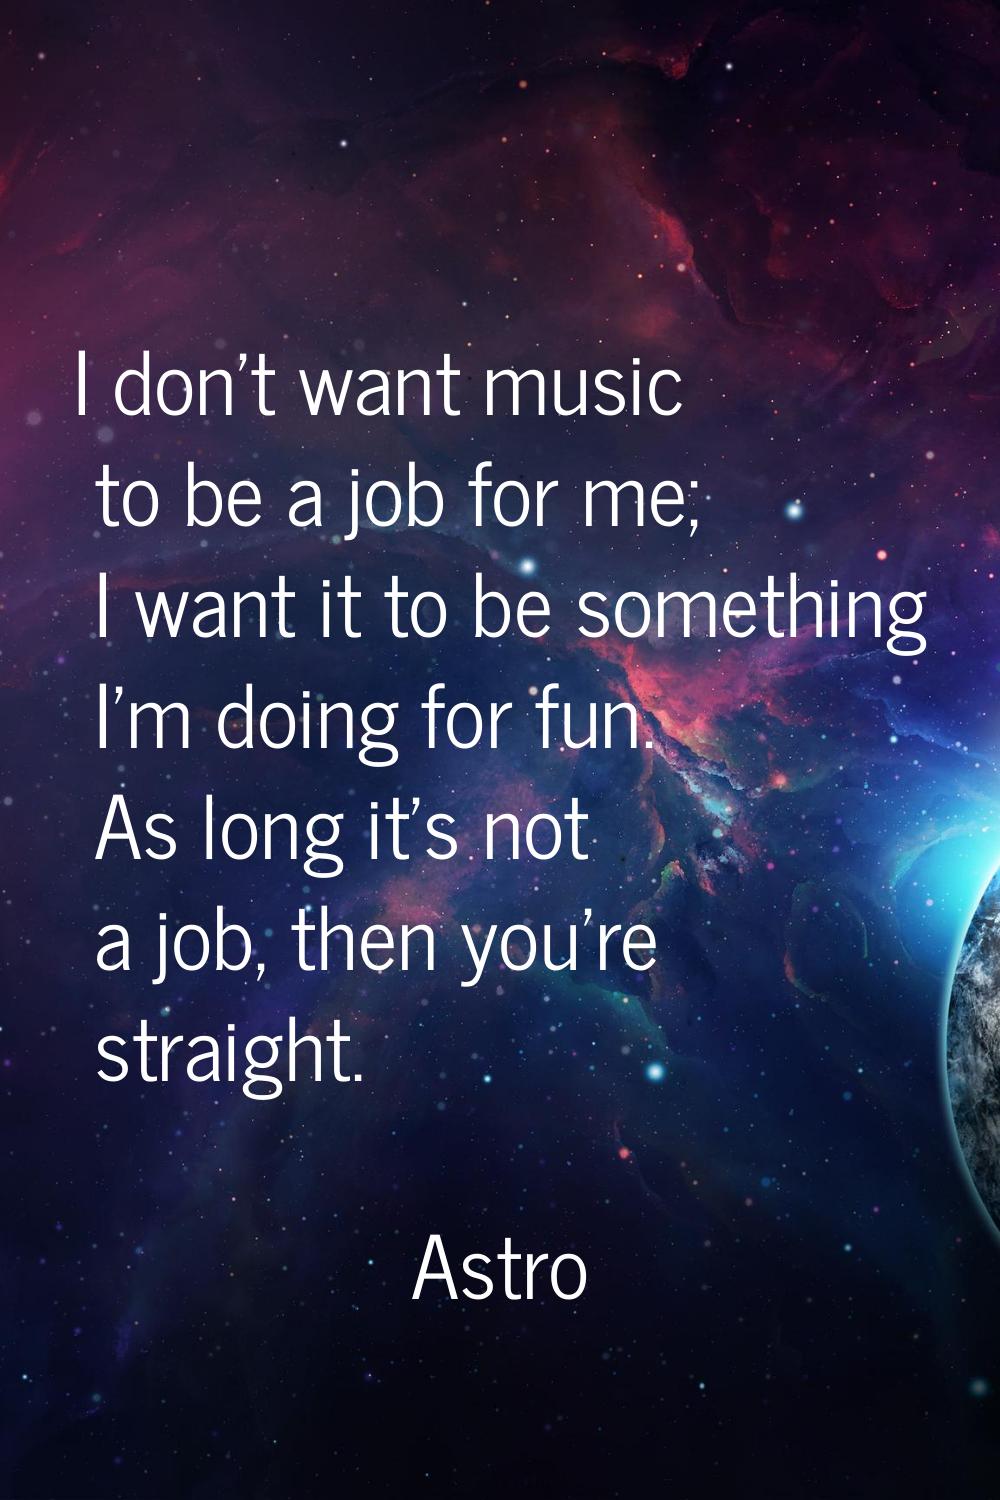 I don't want music to be a job for me; I want it to be something I'm doing for fun. As long it's no